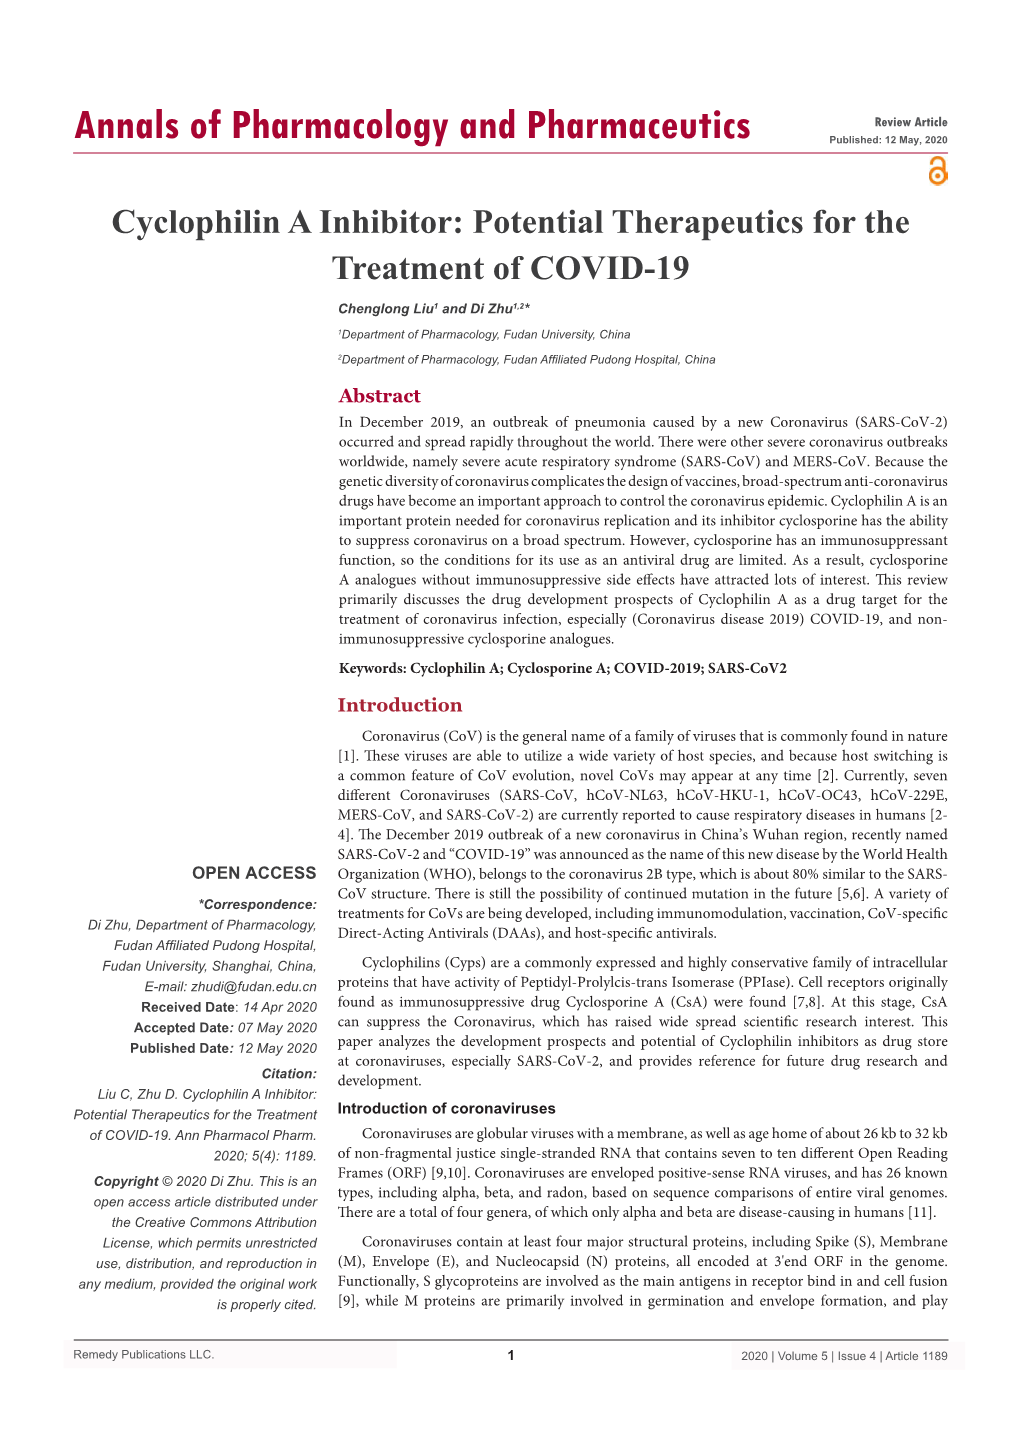 Cyclophilin a Inhibitor: Potential Therapeutics for the Treatment of COVID-19